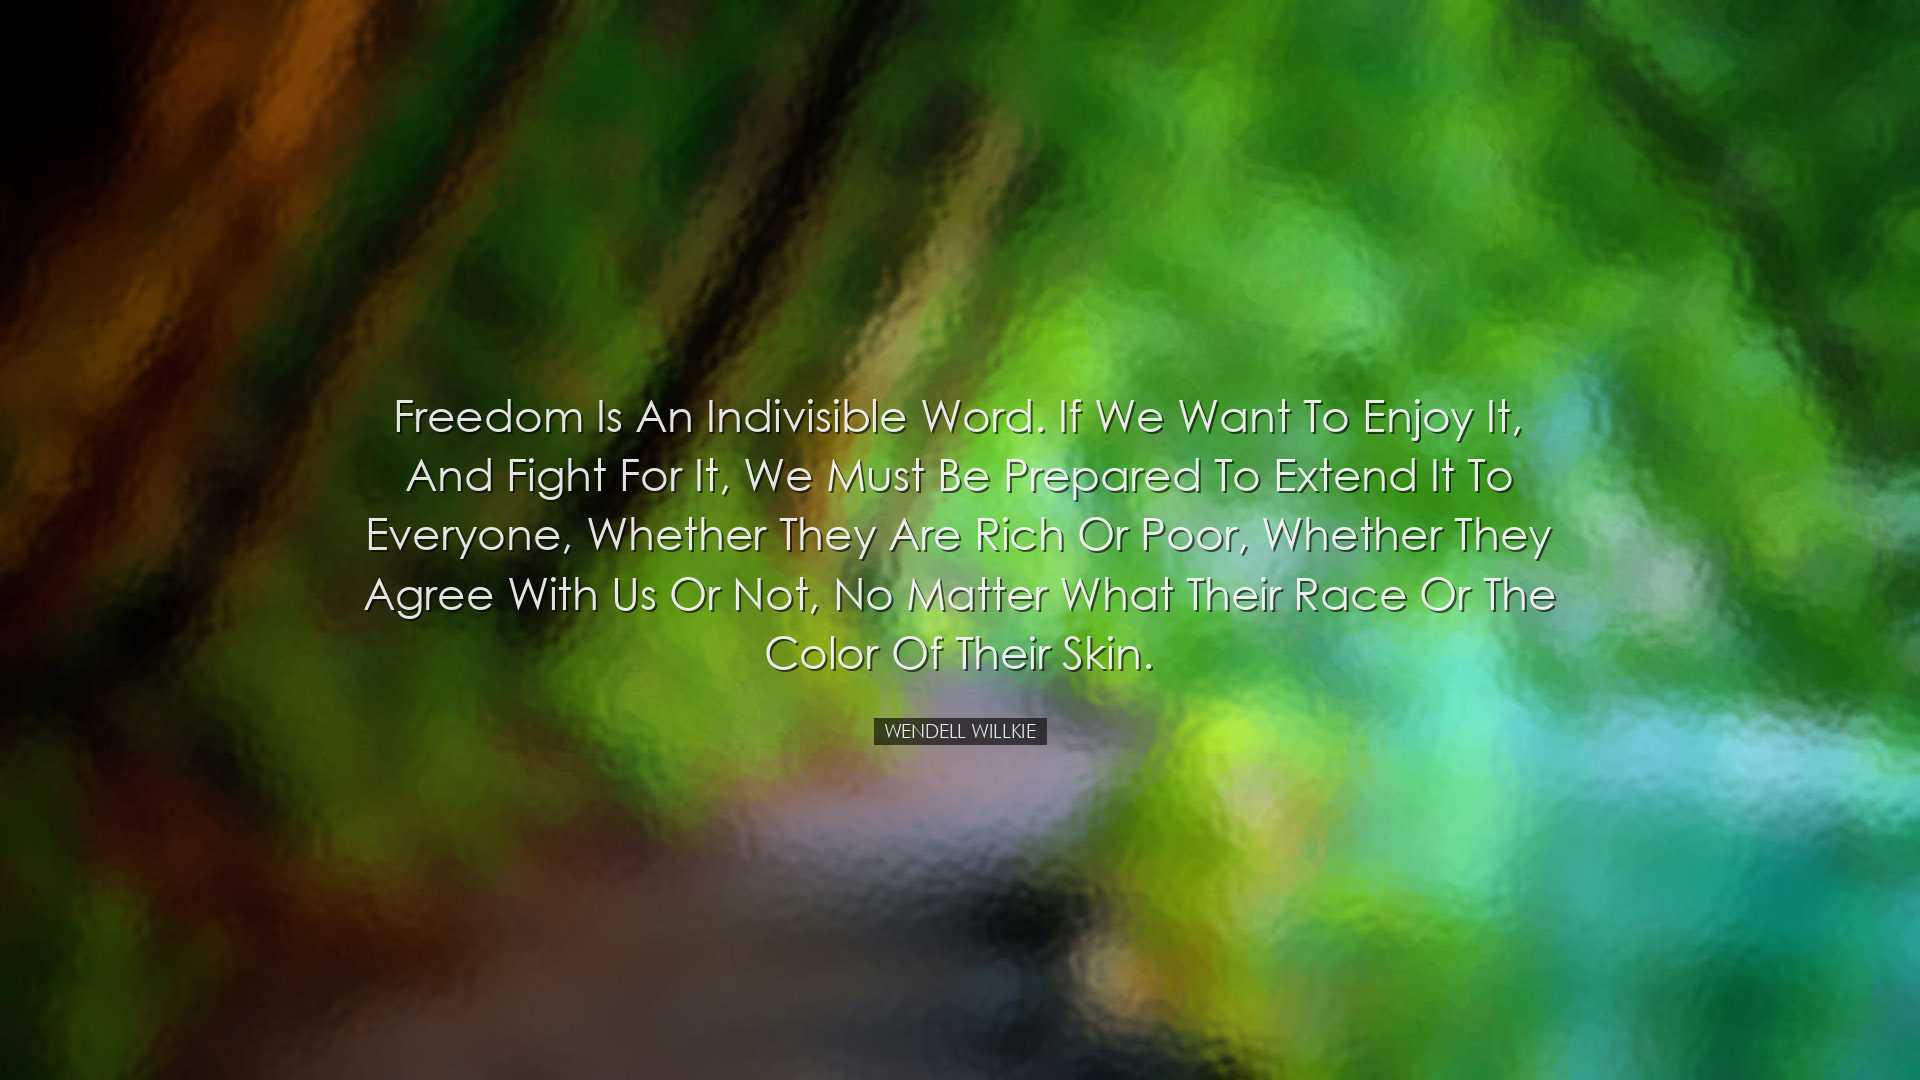 Freedom is an indivisible word. If we want to enjoy it, and fight